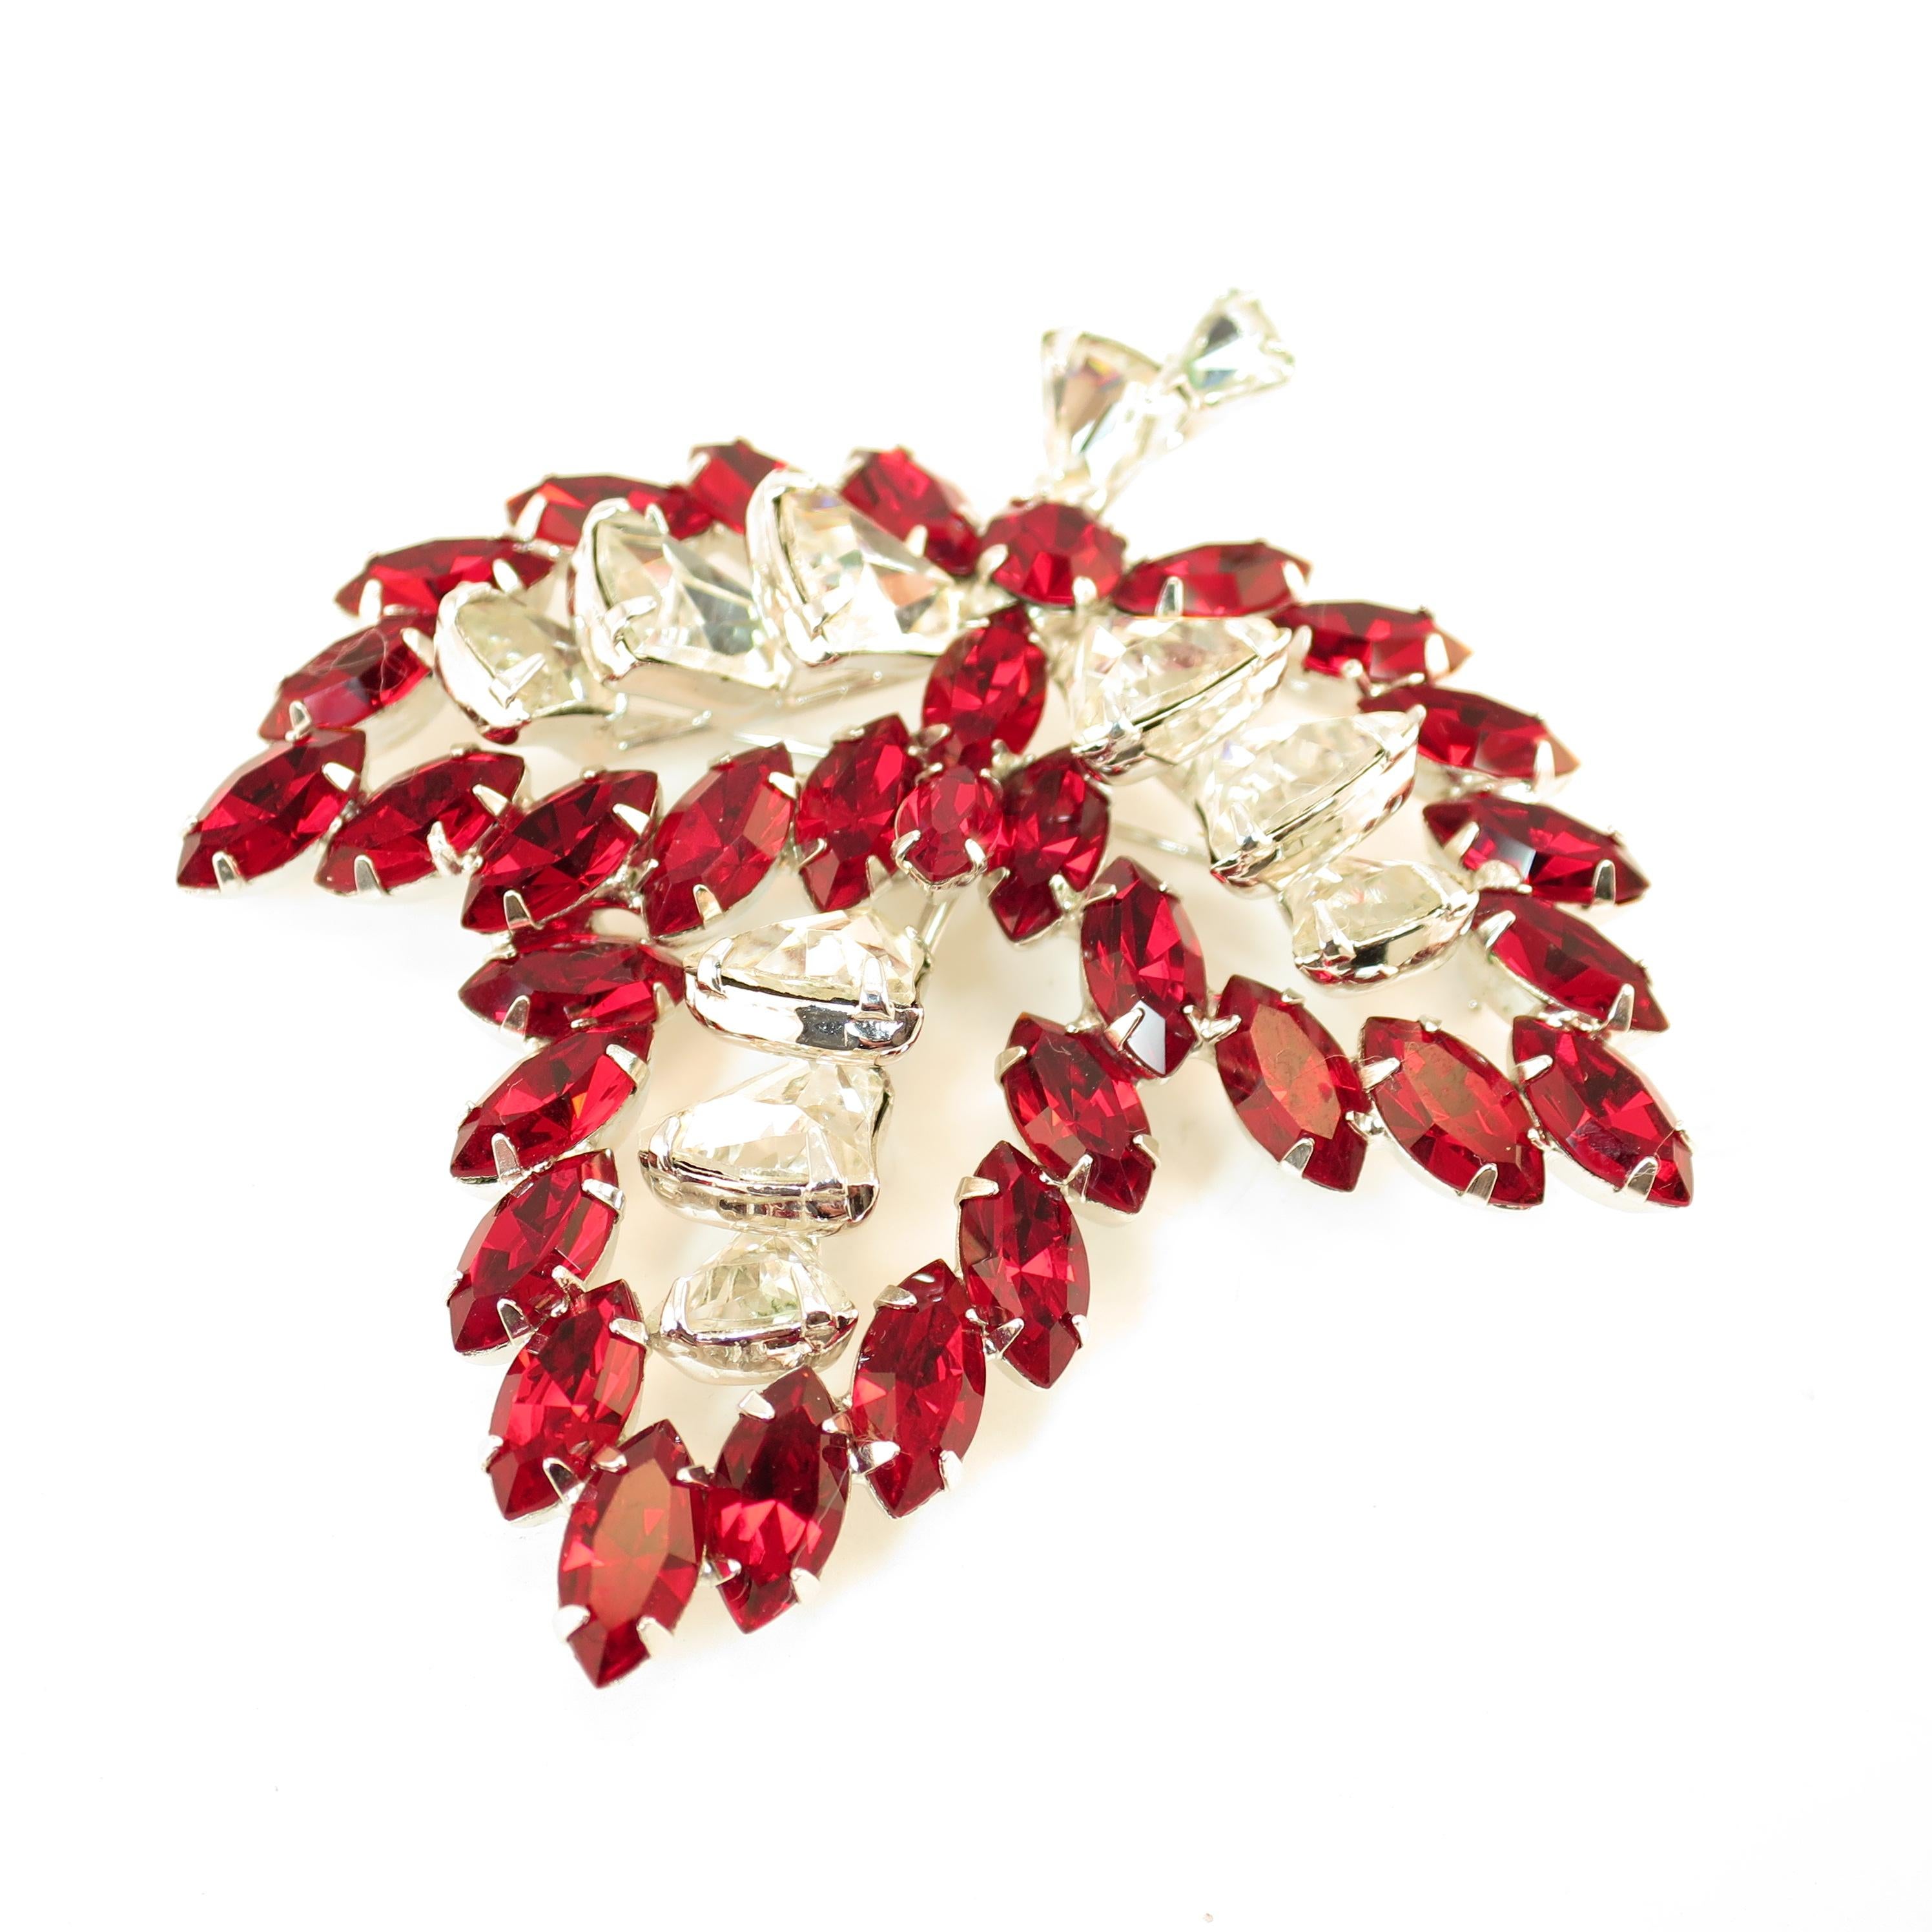 Offered here is a Vendome rhodium-plated brooch embellished with Austrian crystals from the 1950s. The three-dimensional tripartite leaf design presents deep-ruby marquise stones outlining the leaf, surrounding a center of fancy-cut bell-shaped